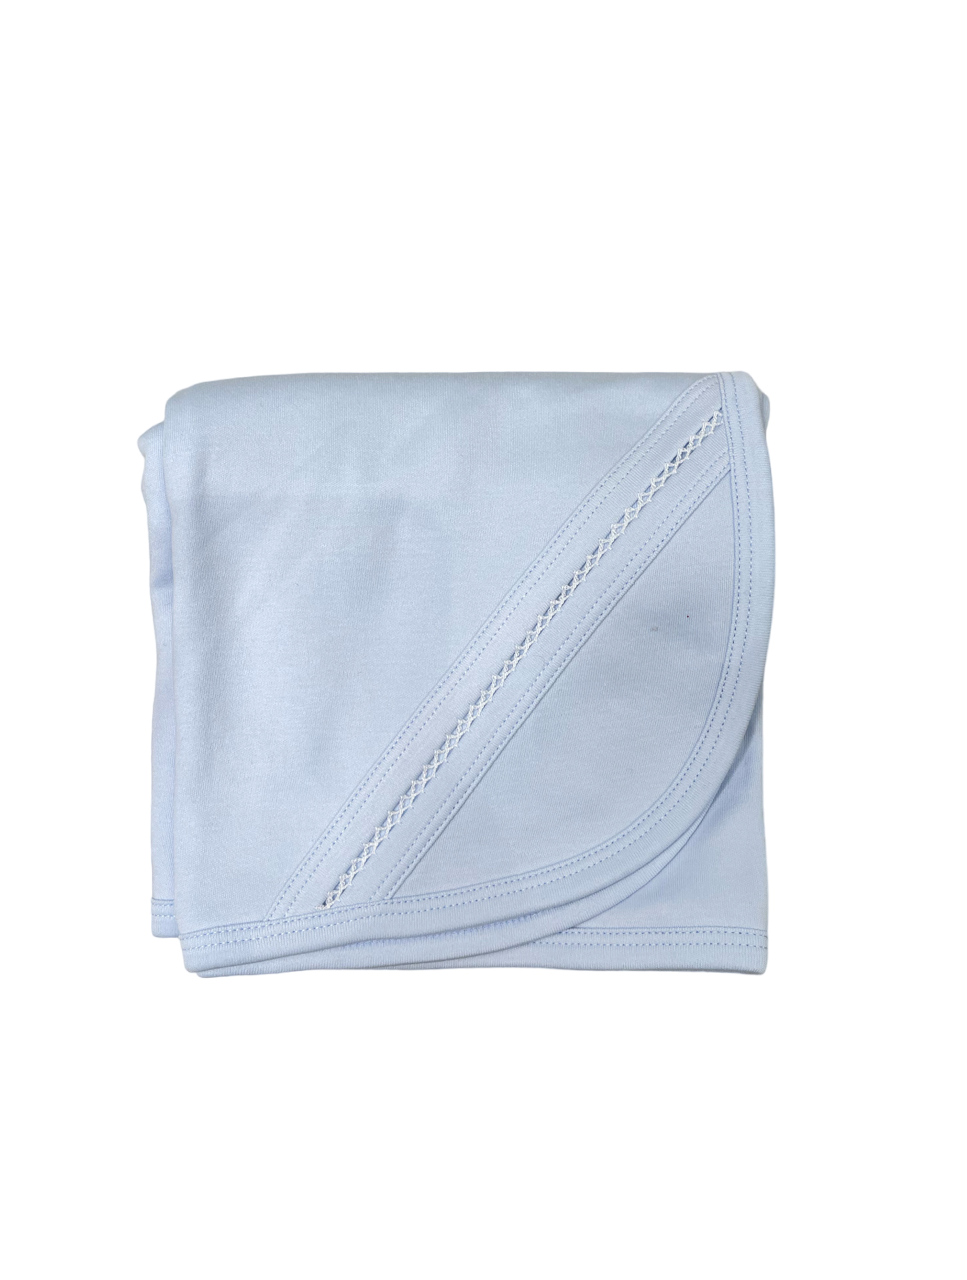 Light Blue With White Trim Take Me Home Blanket